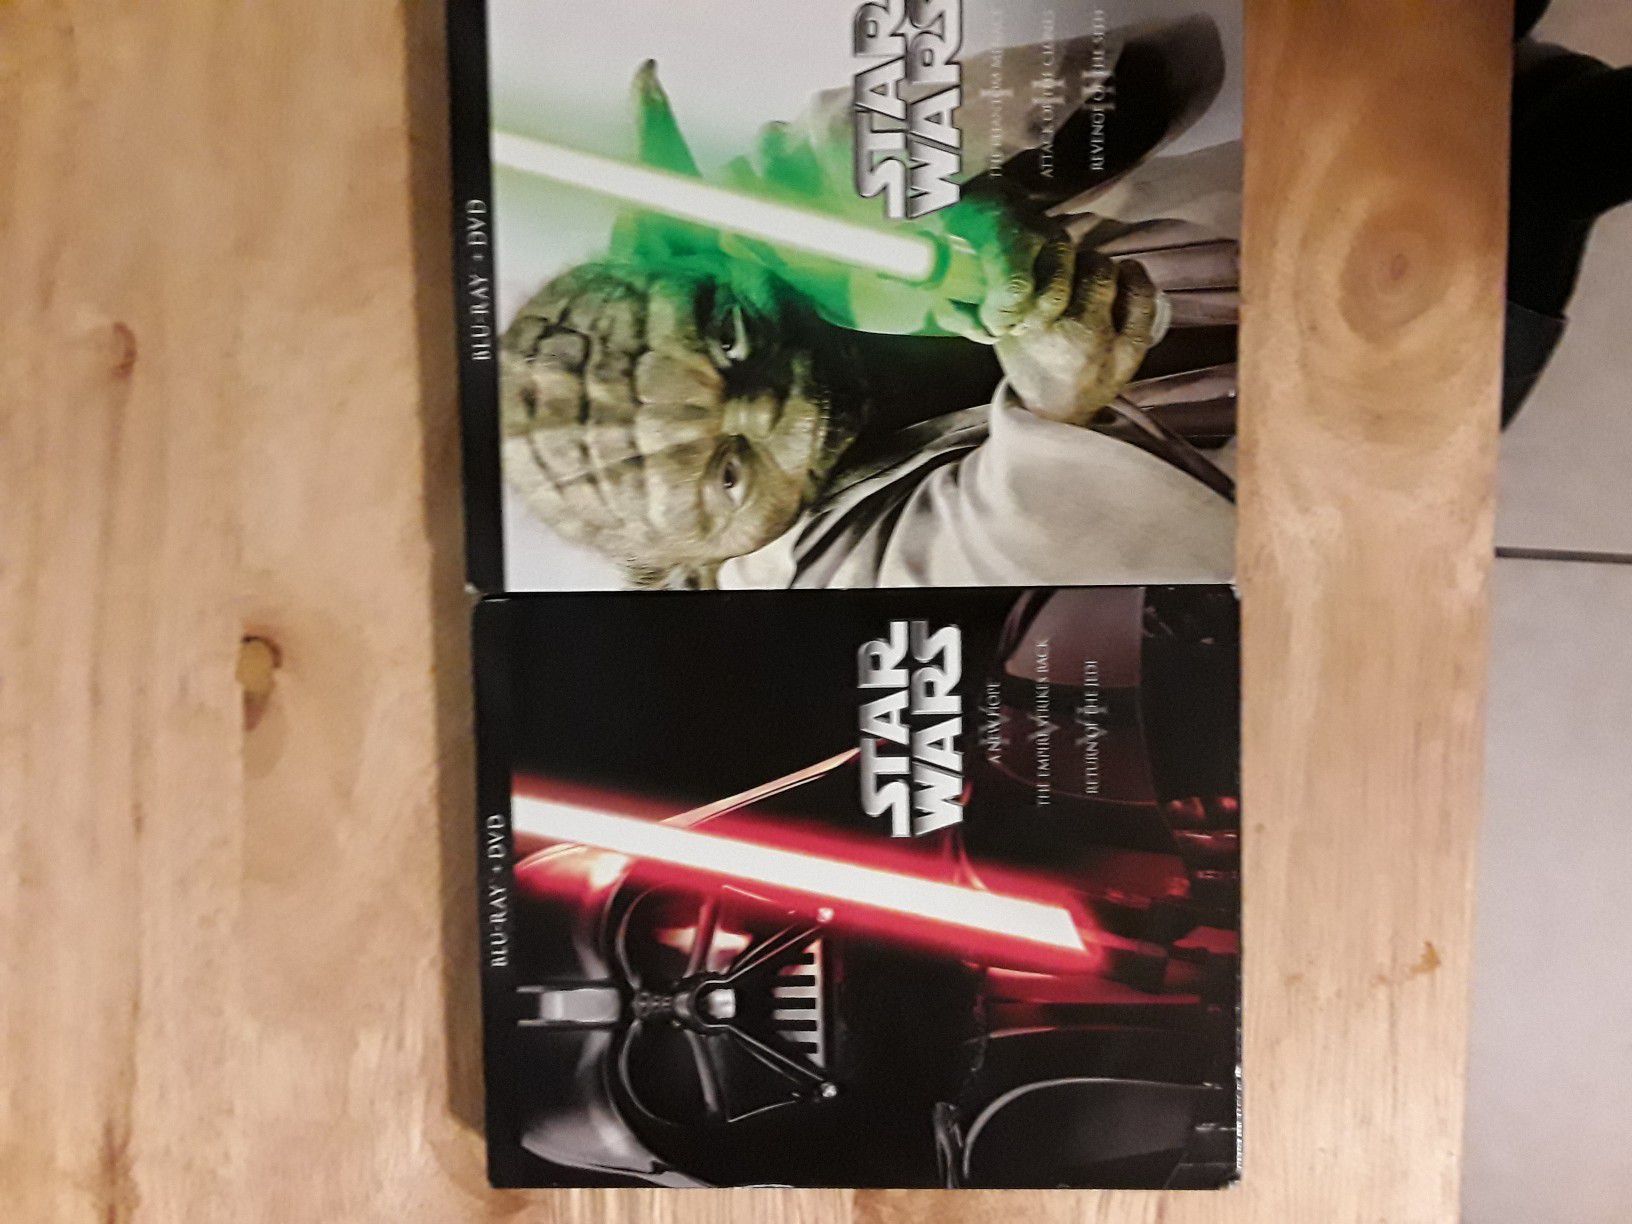 Star Wars Blue Ray Collection